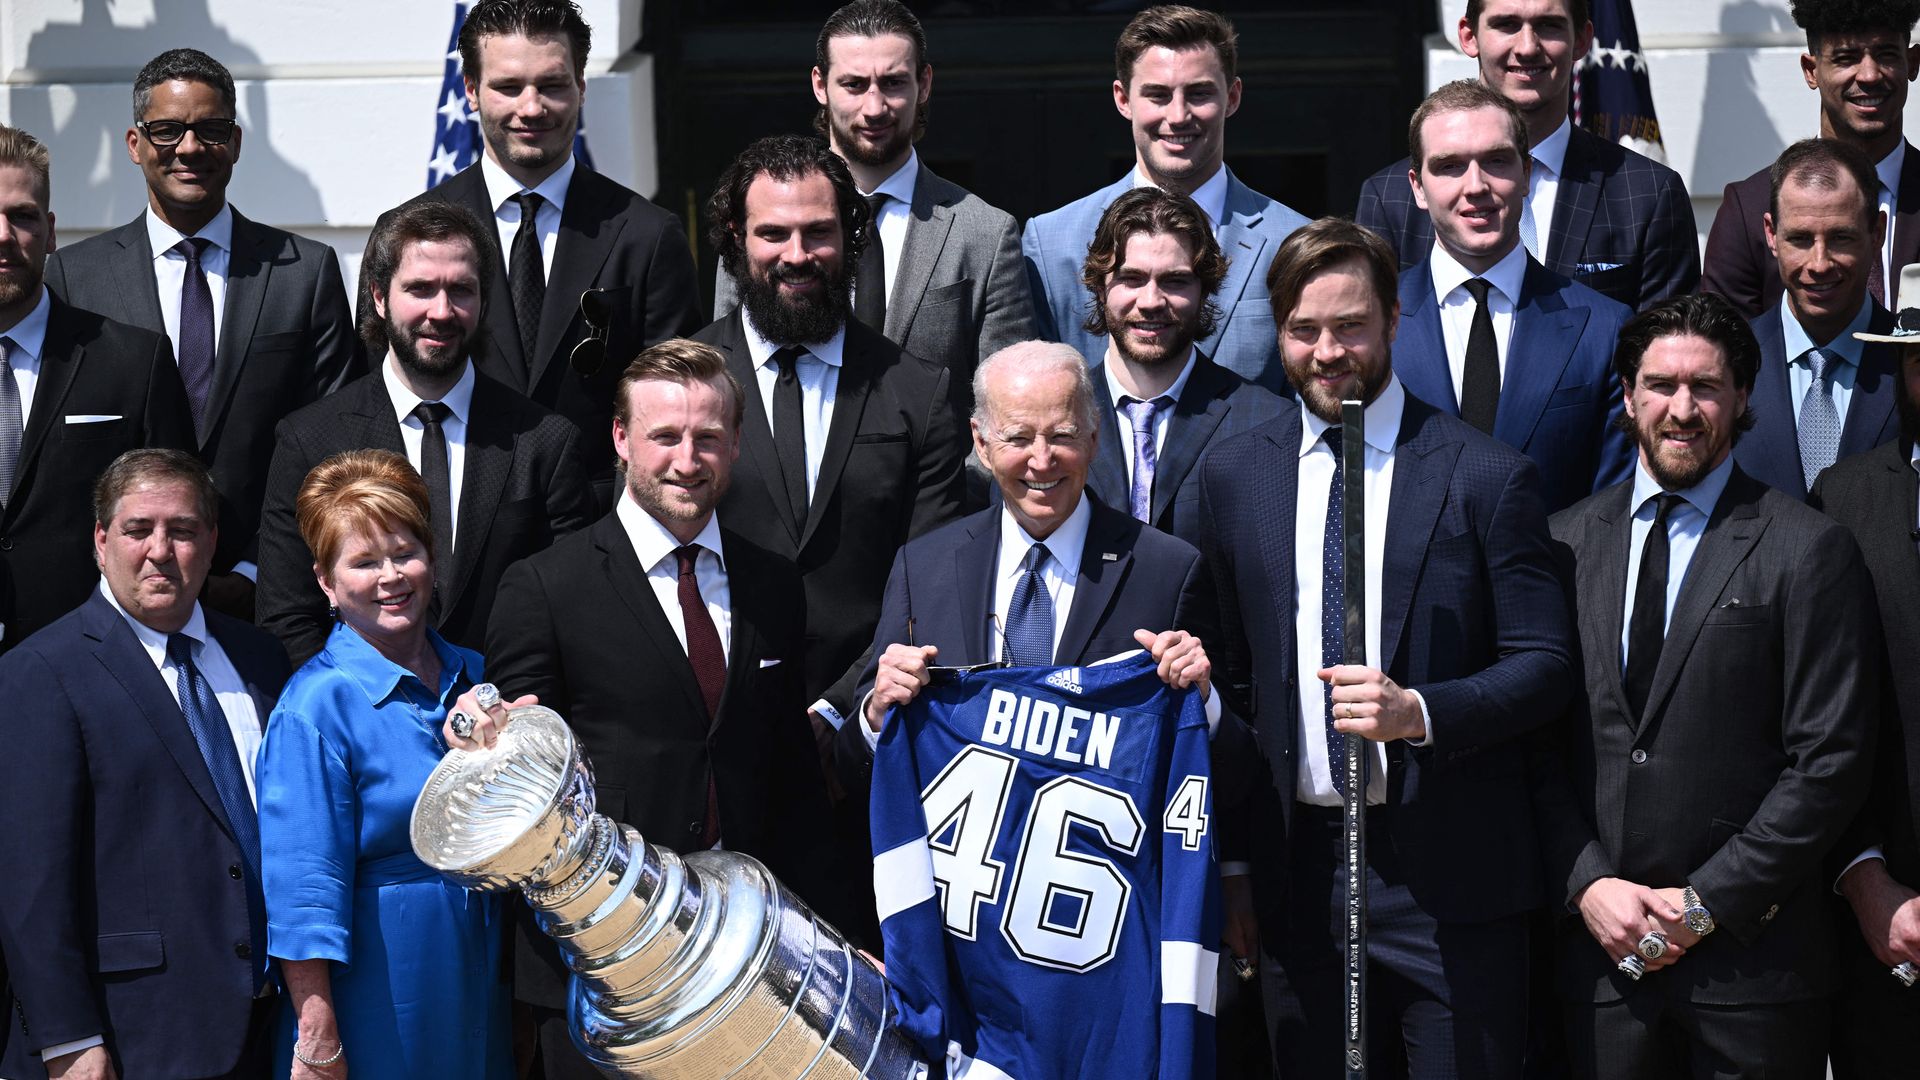 President Biden is seen posing with members of the Tampa Bay Lighting to celebrate their Stanley Cup win.